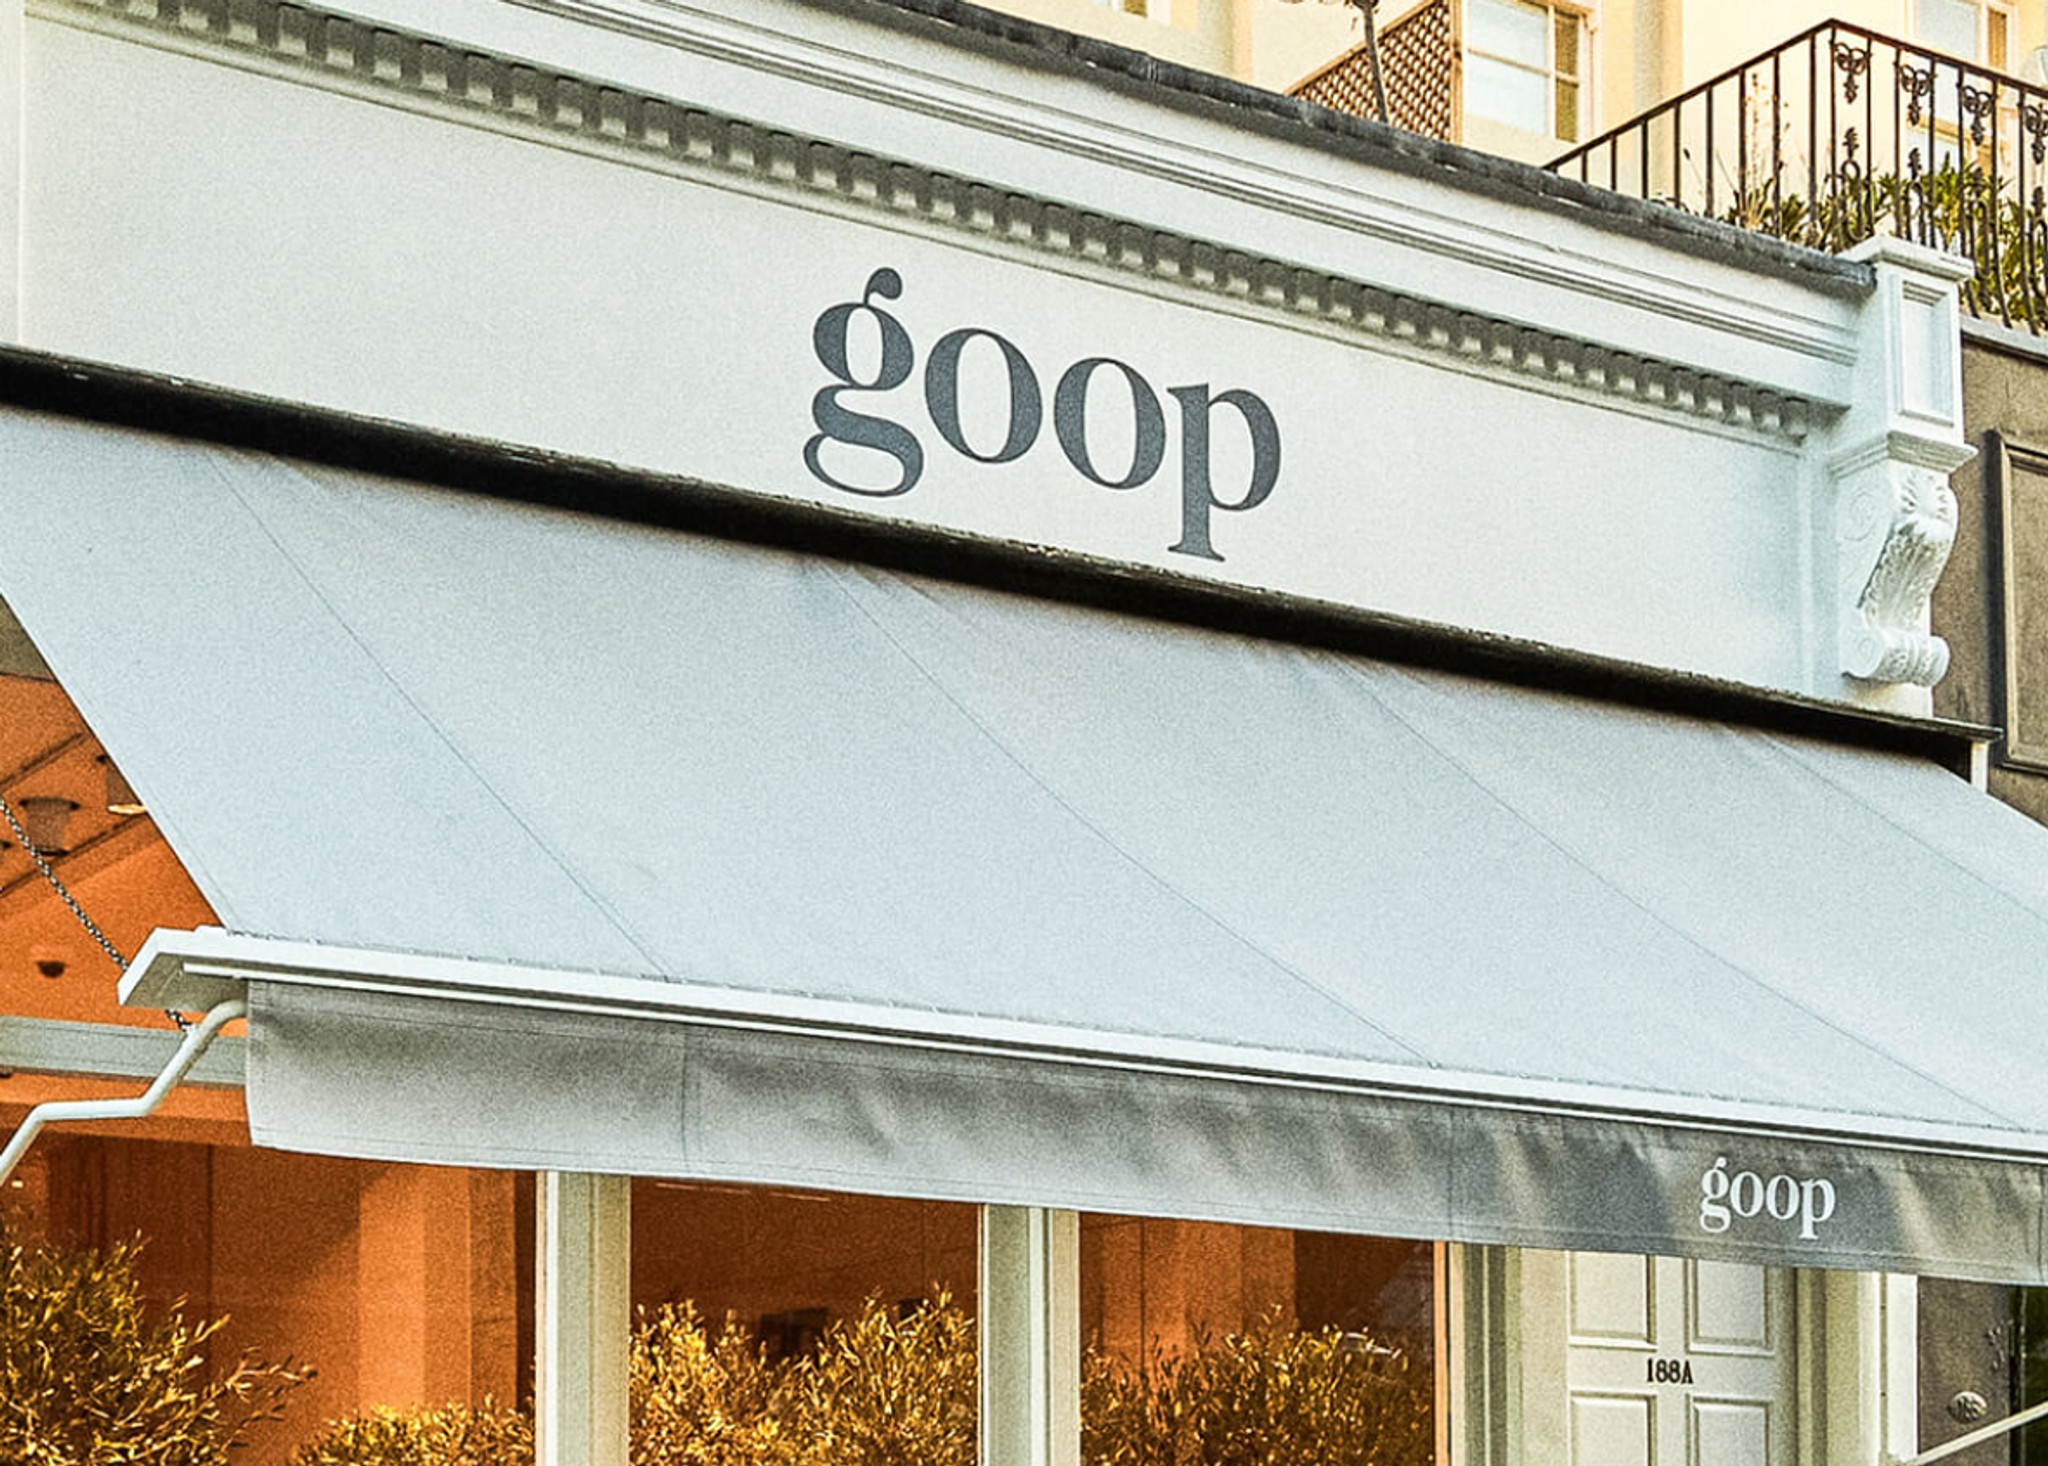 Goop's London closure signifies a change in wellness